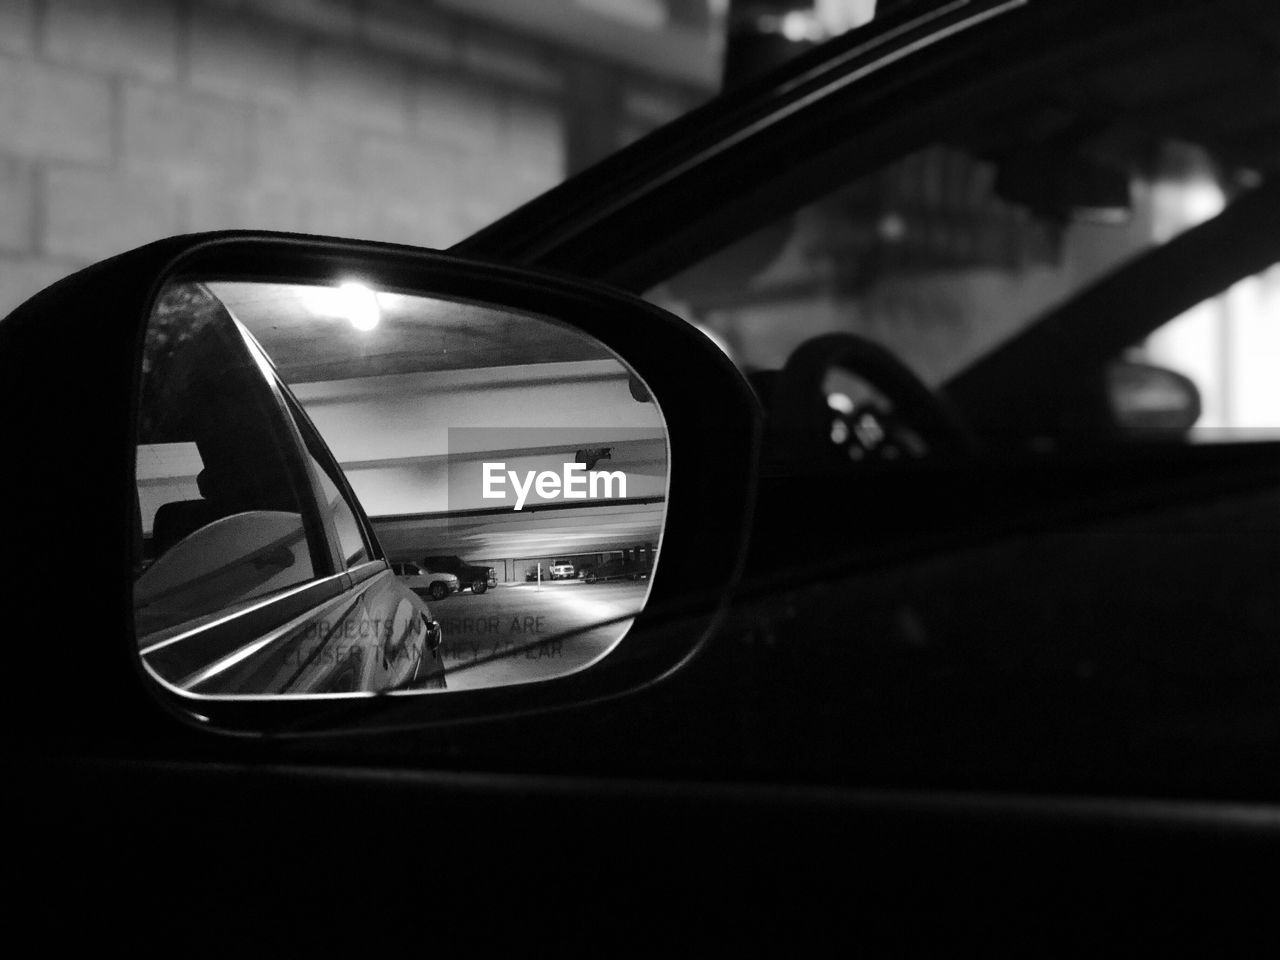 REFLECTION OF CAR ON SIDE-VIEW MIRROR OF VEHICLE